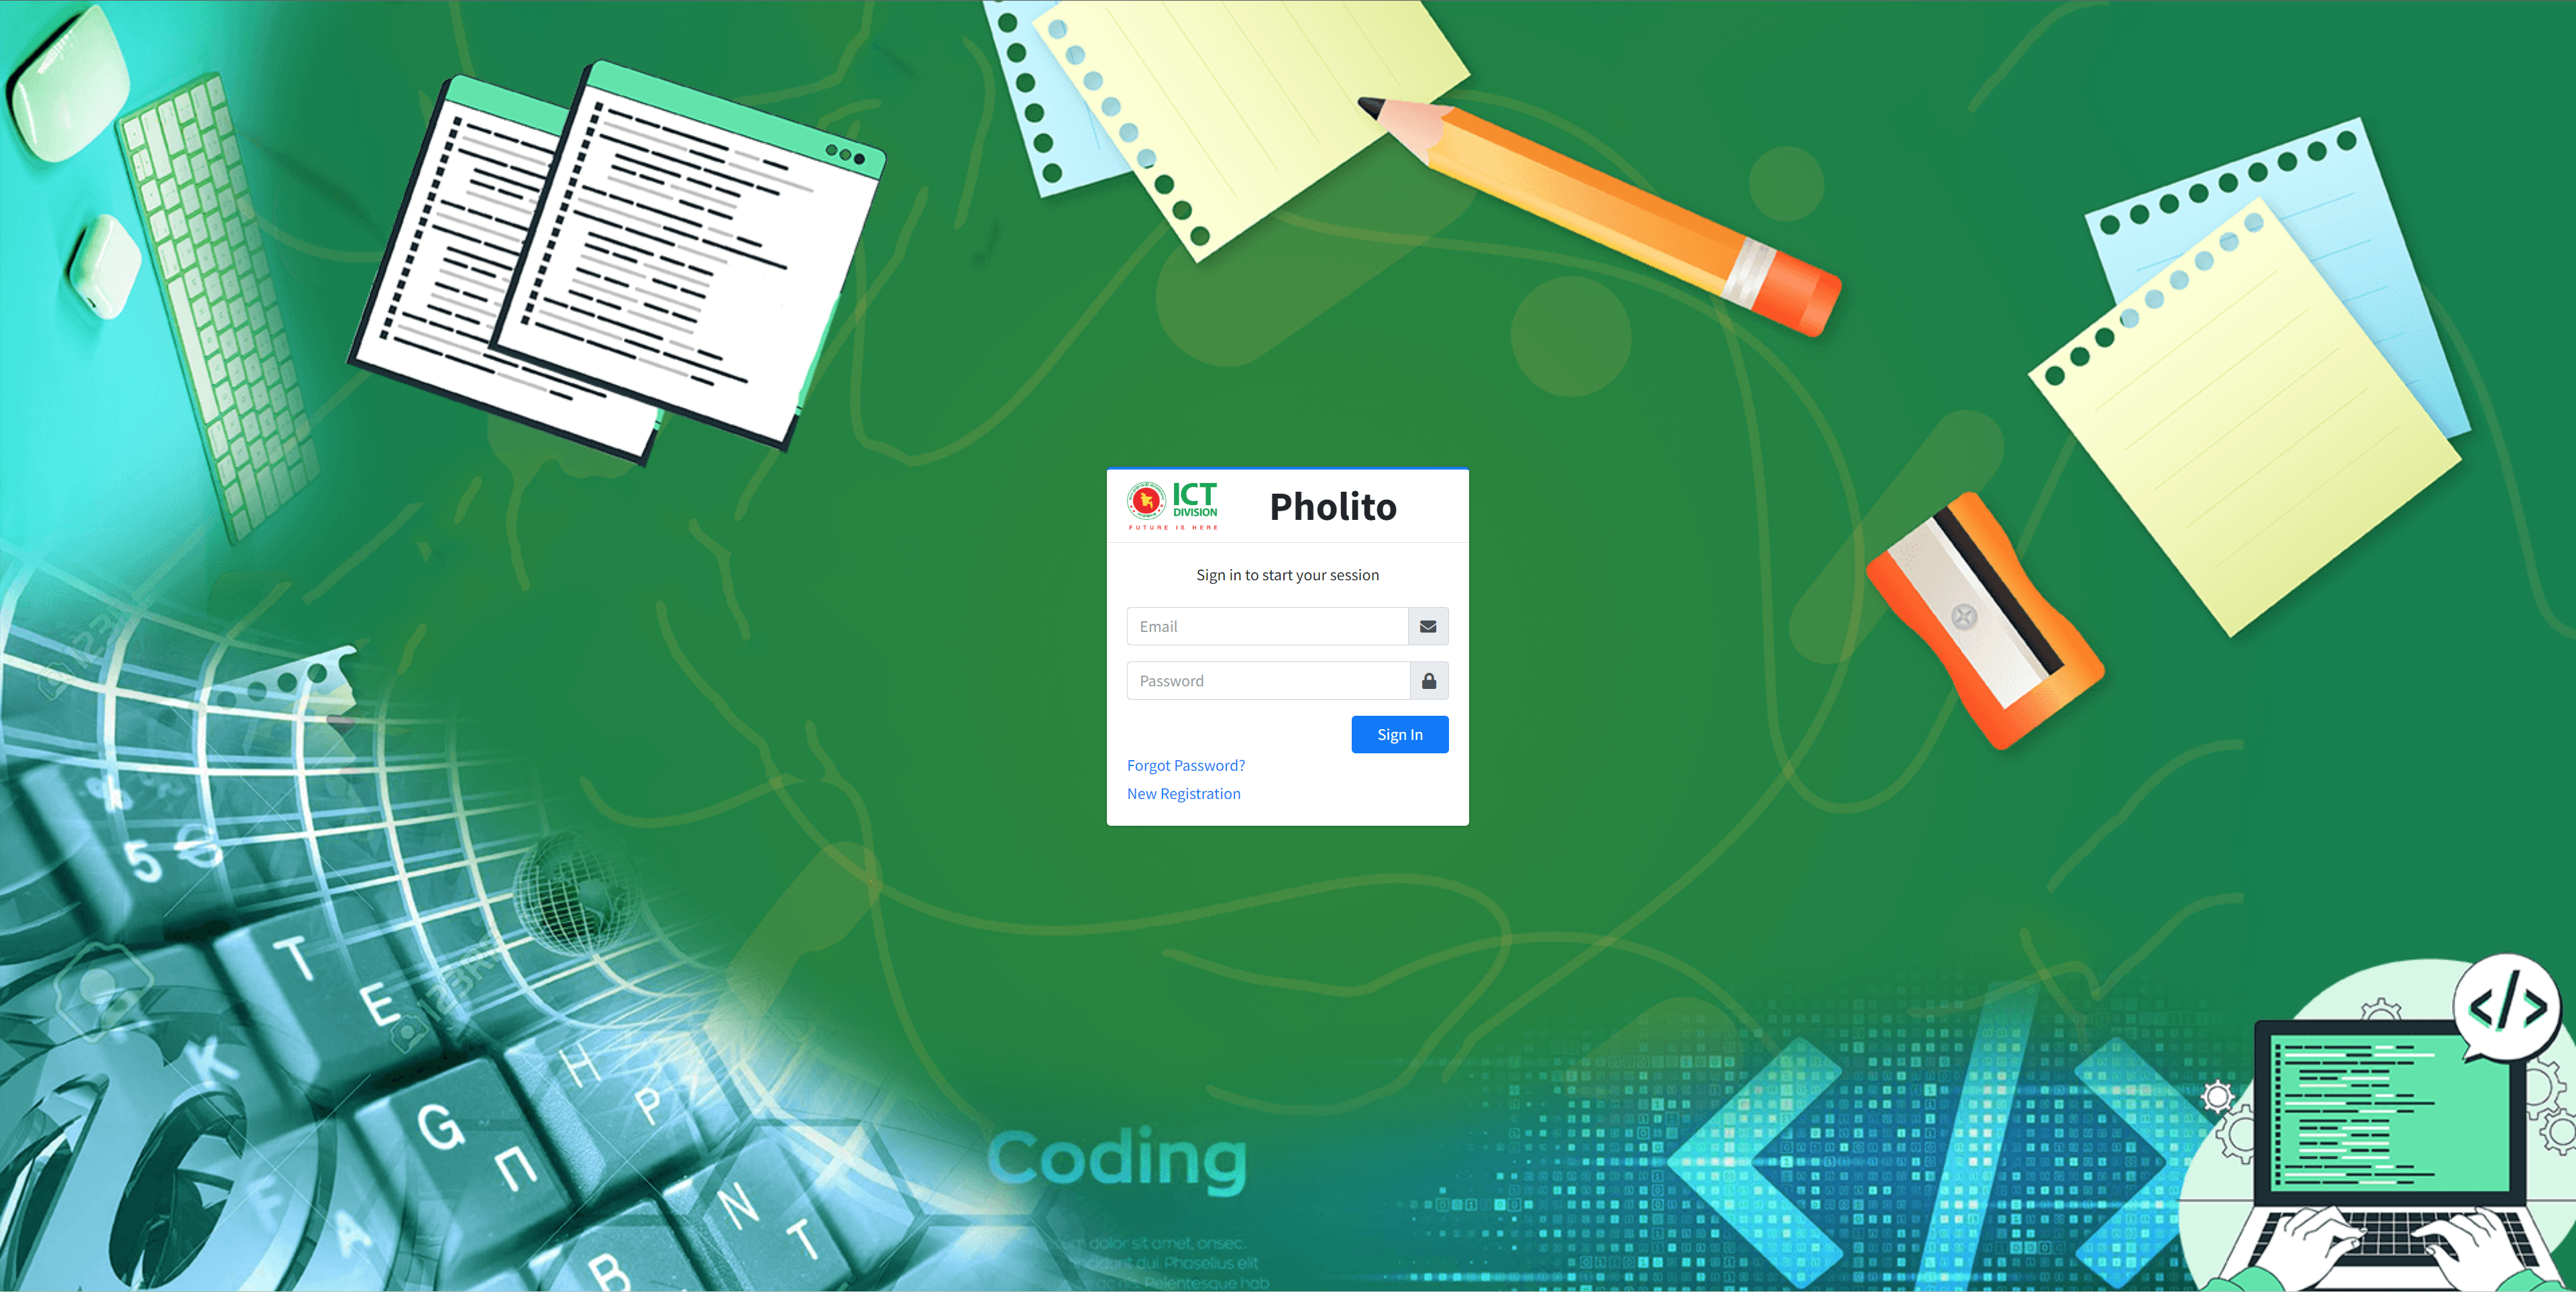 Pholito: A SaaS Based Programming Platform for Secondary and Higher Secondary Level ICT Education